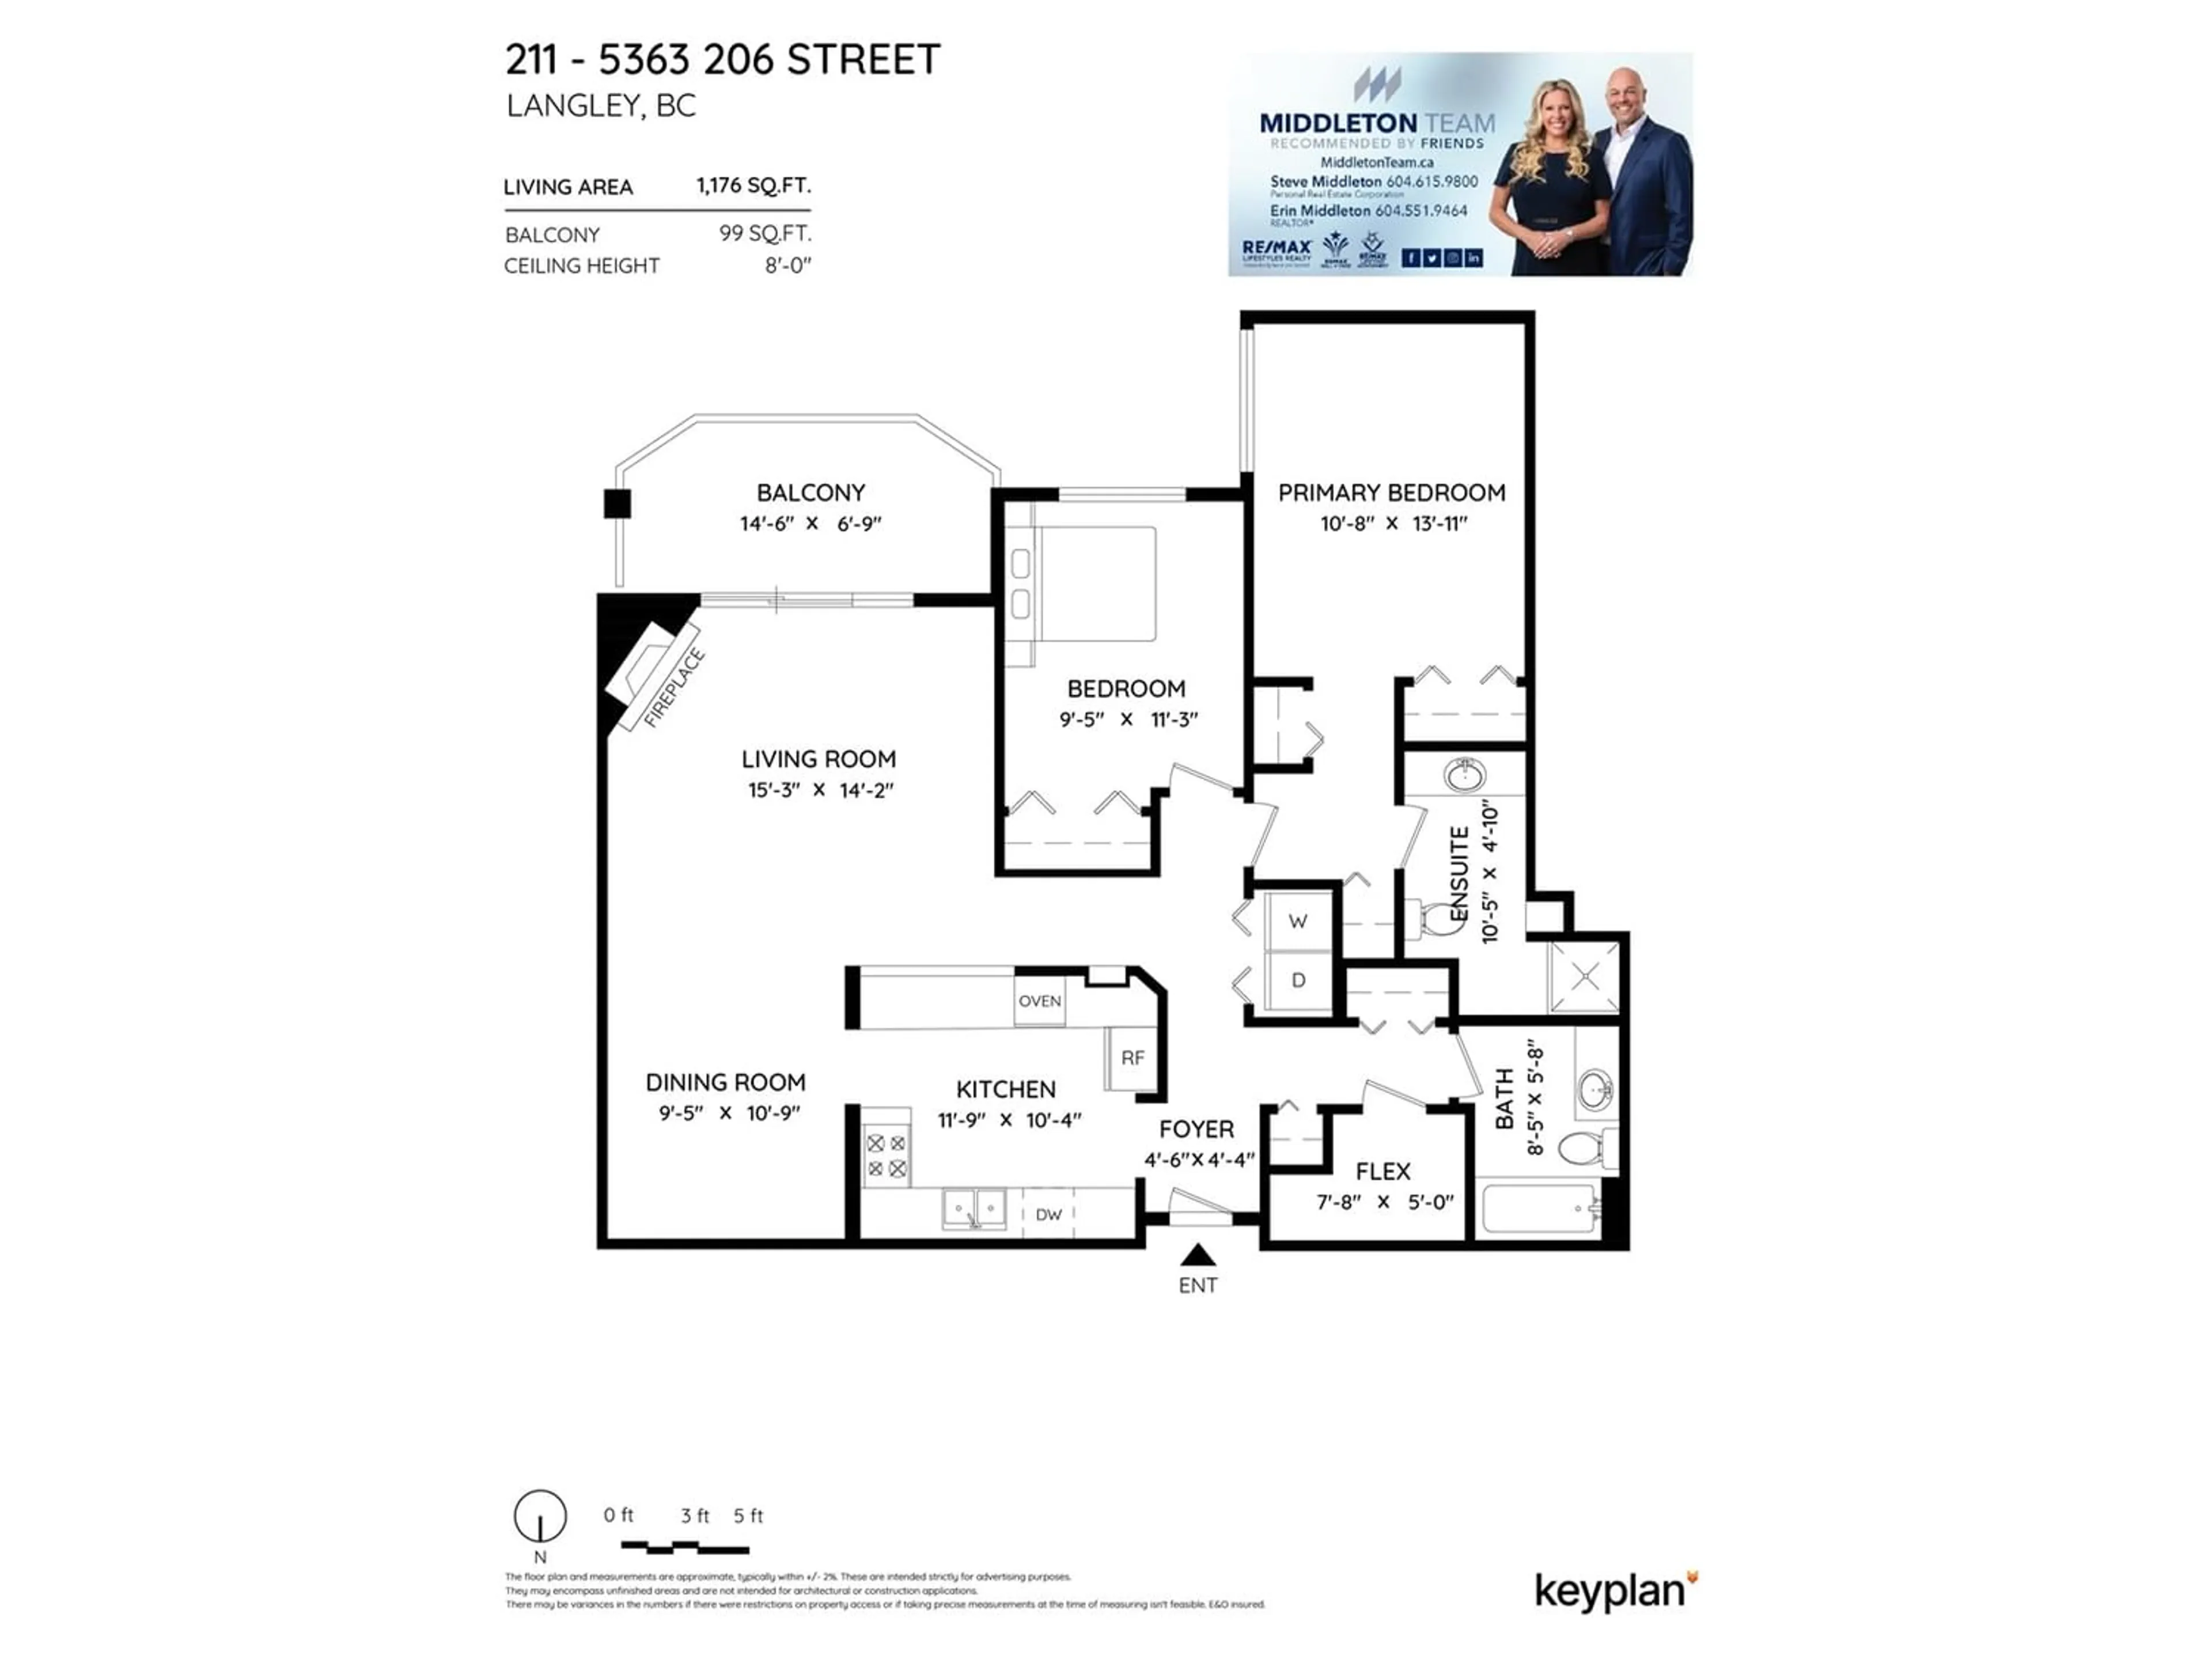 Floor plan for 211 5363 206TH STREET, Langley British Columbia V3A2C5